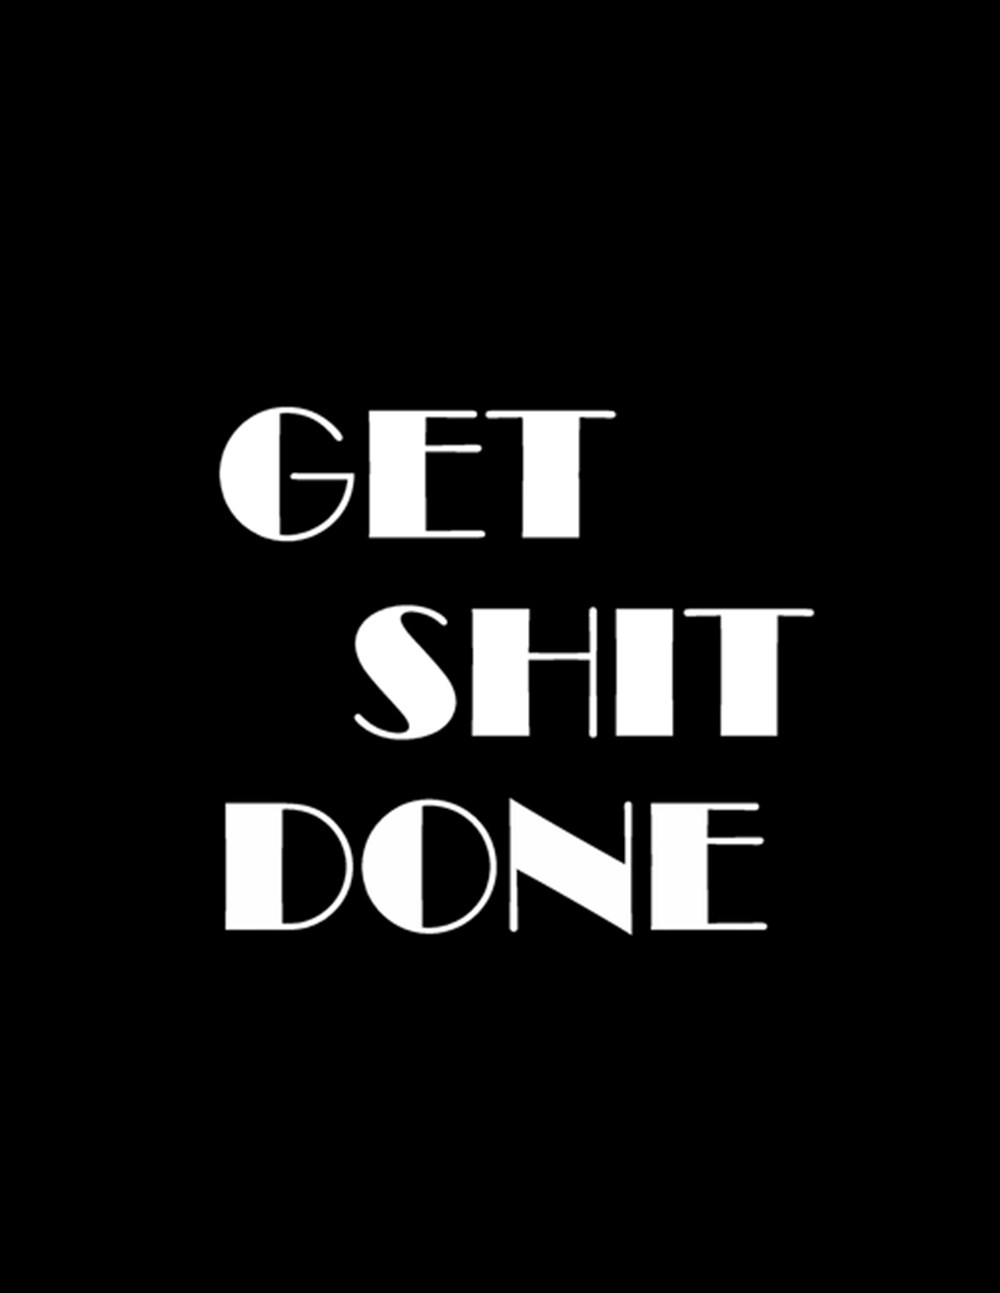 Get Shit Done 2019-2020 Weekly Planner - December 1,2019 to December 31, 2020 - Weekly & Monthly Vie